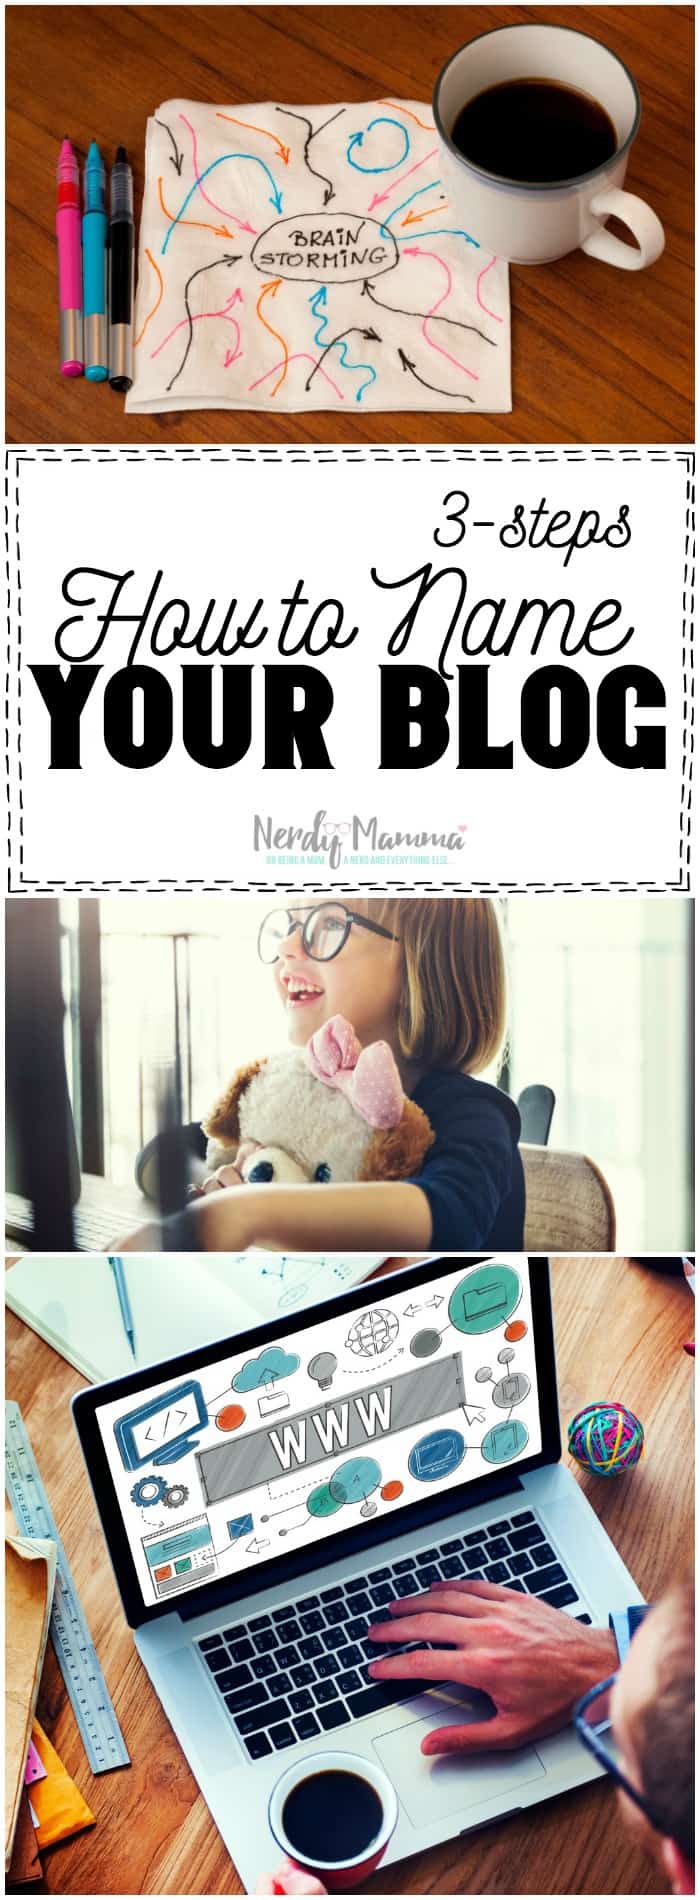 I love this advice on how to name your blog. So simple--but exactly what I needed to hear.